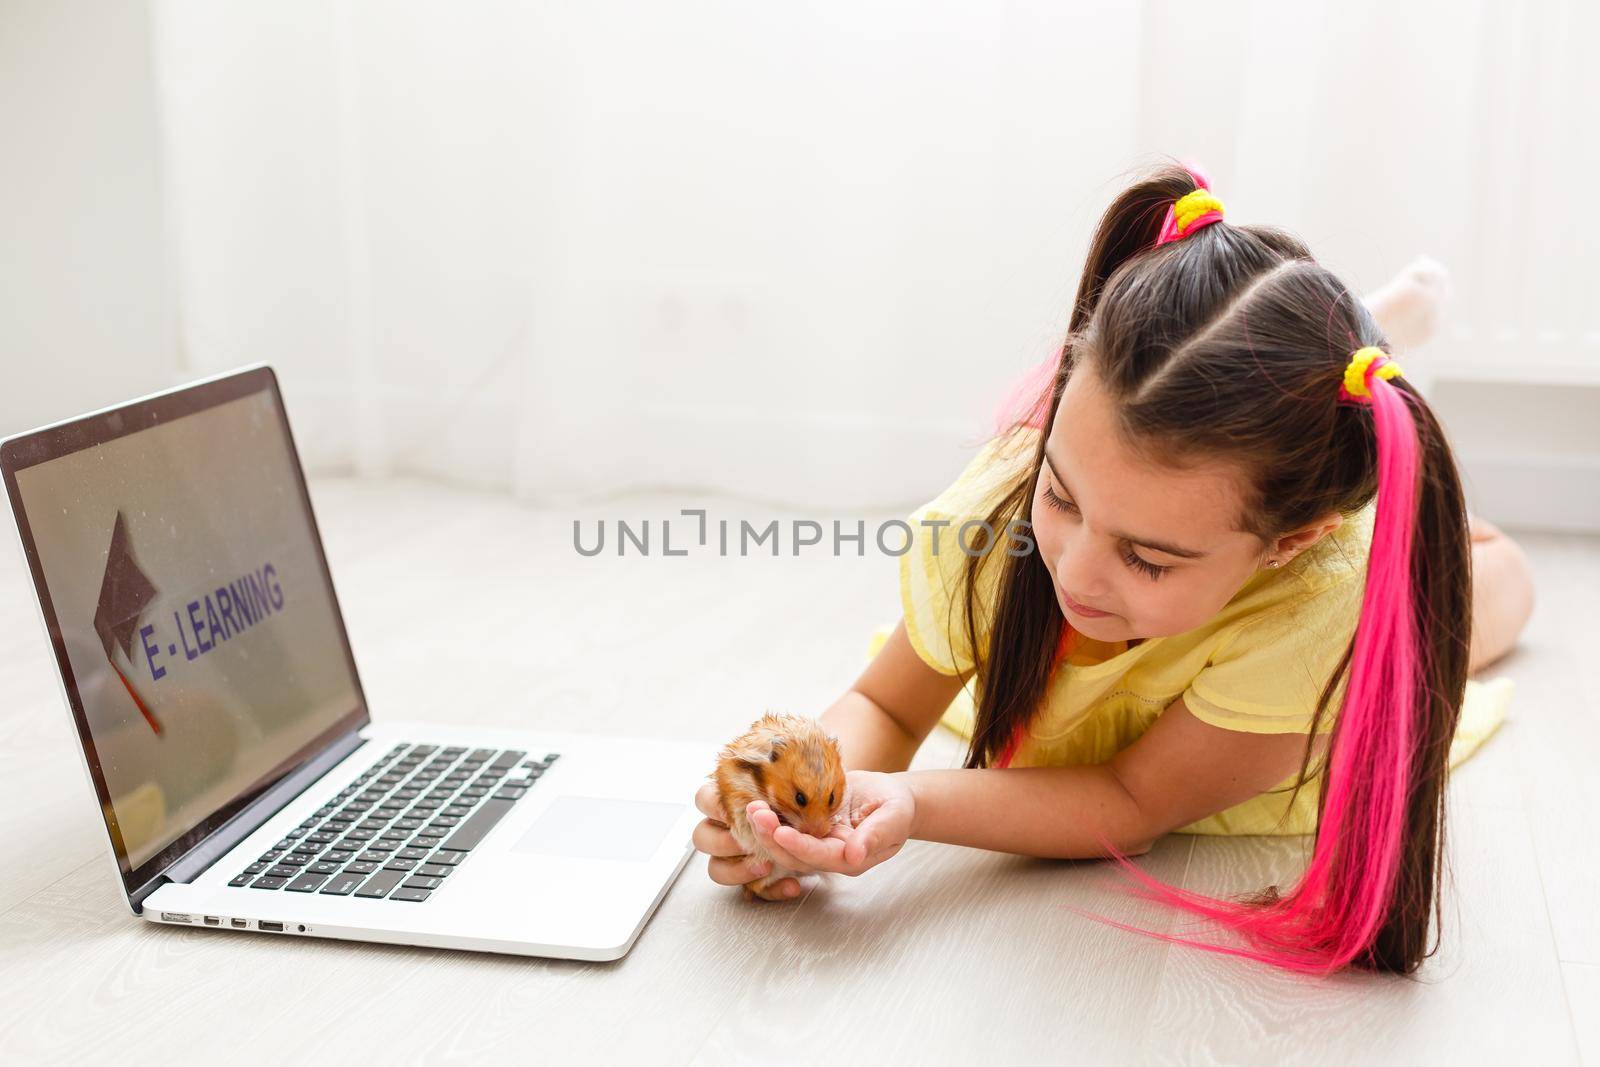 Cheerful young little girl with a pet hamster using laptop computer studying through online e-learning system at home. Distance or remote learning